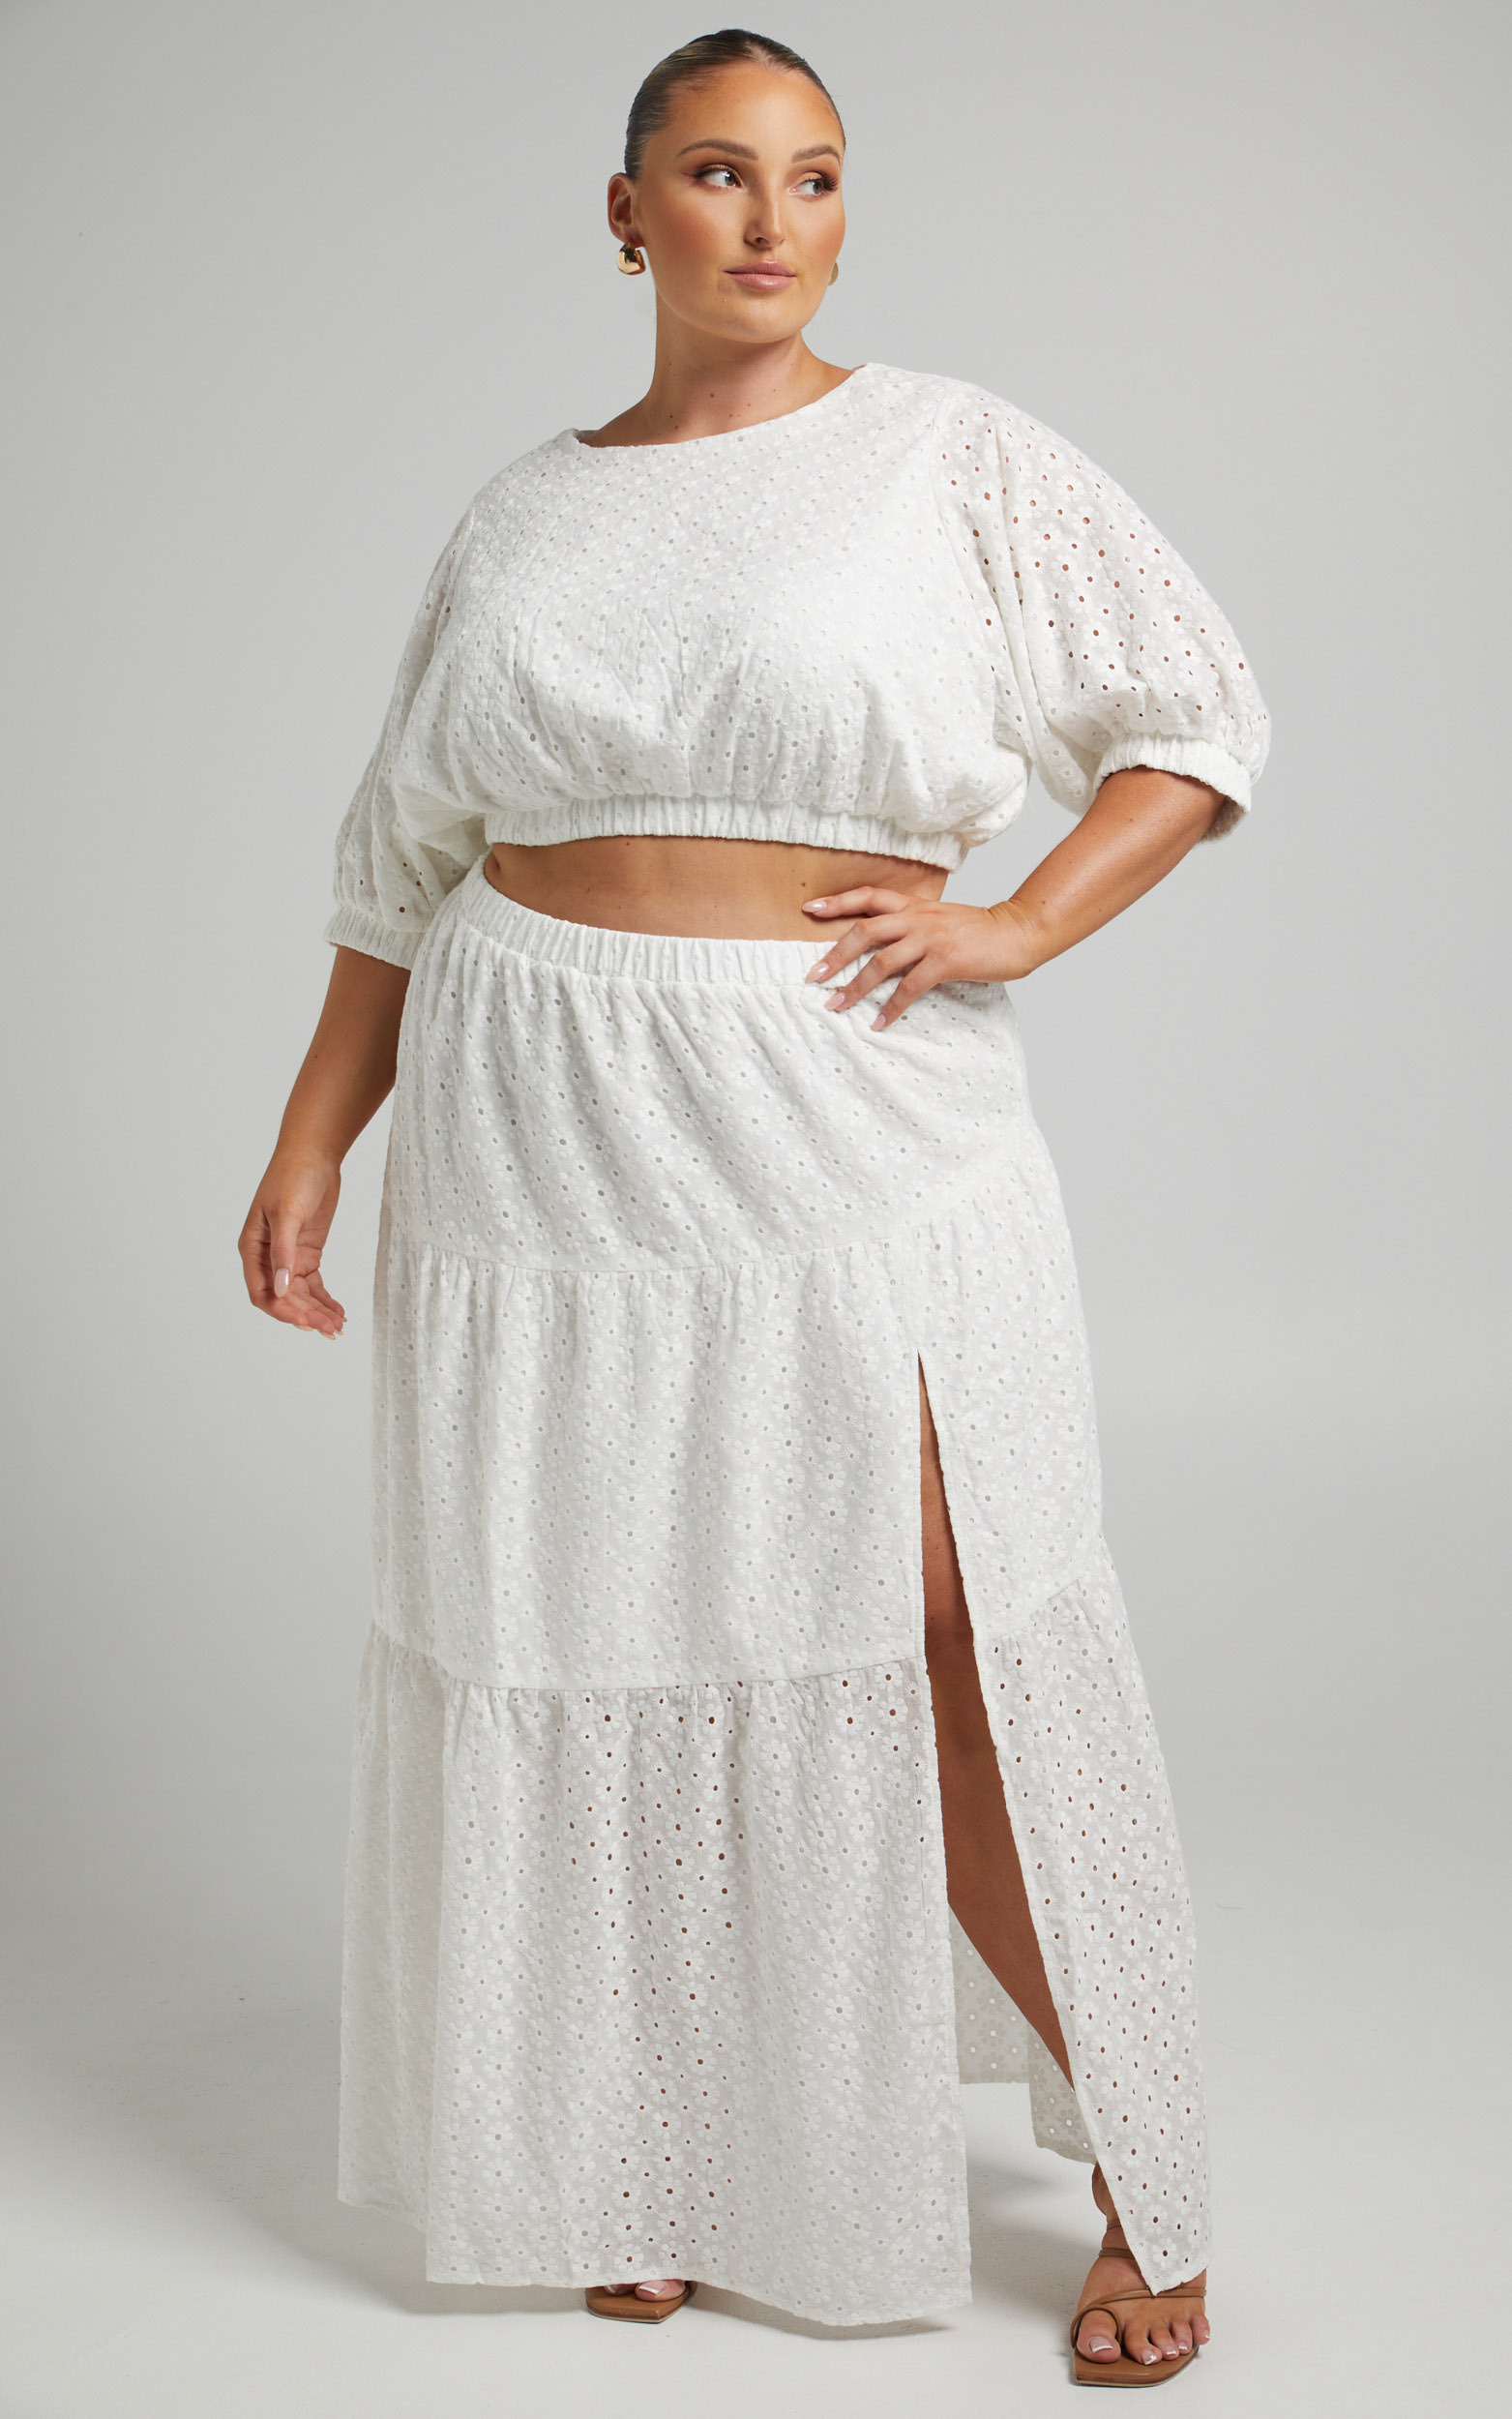 Clarita broderie anglaise Two piece set in White - 04, WHT1, hi-res image number null